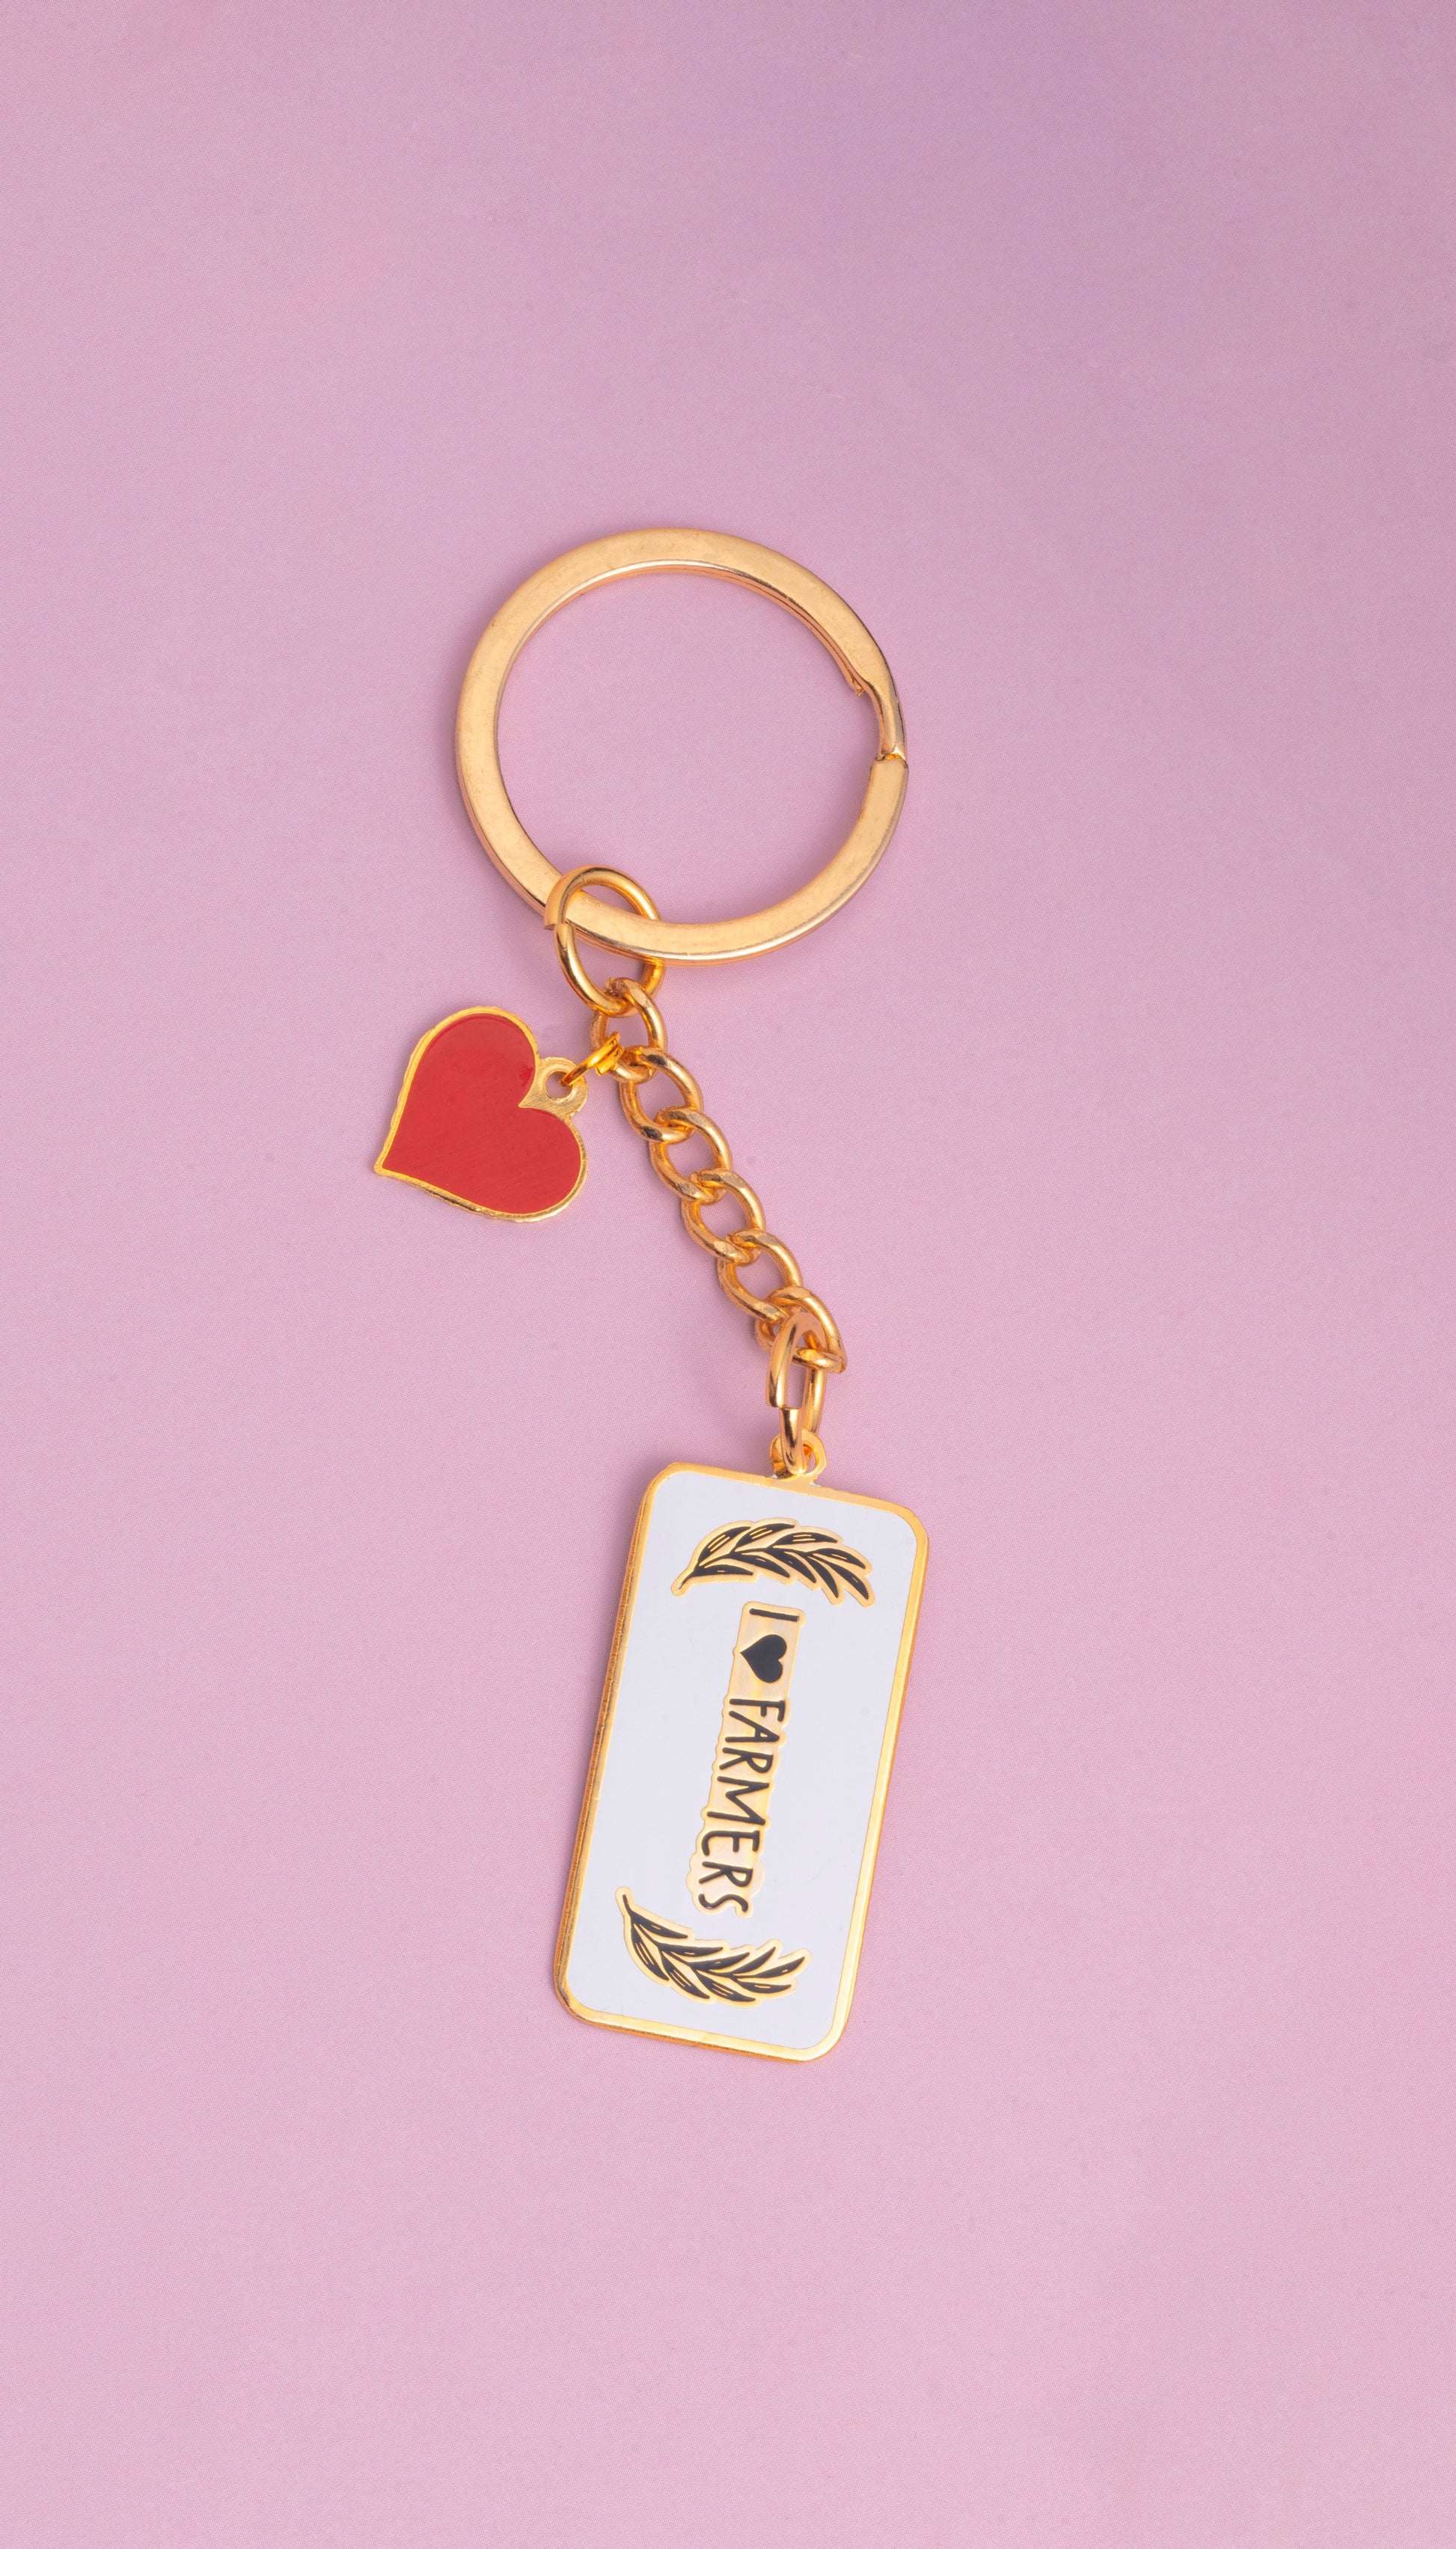 'I Love Farmers' Keychain (with Heart Pendant) - Organic Shop by Pure & Eco India